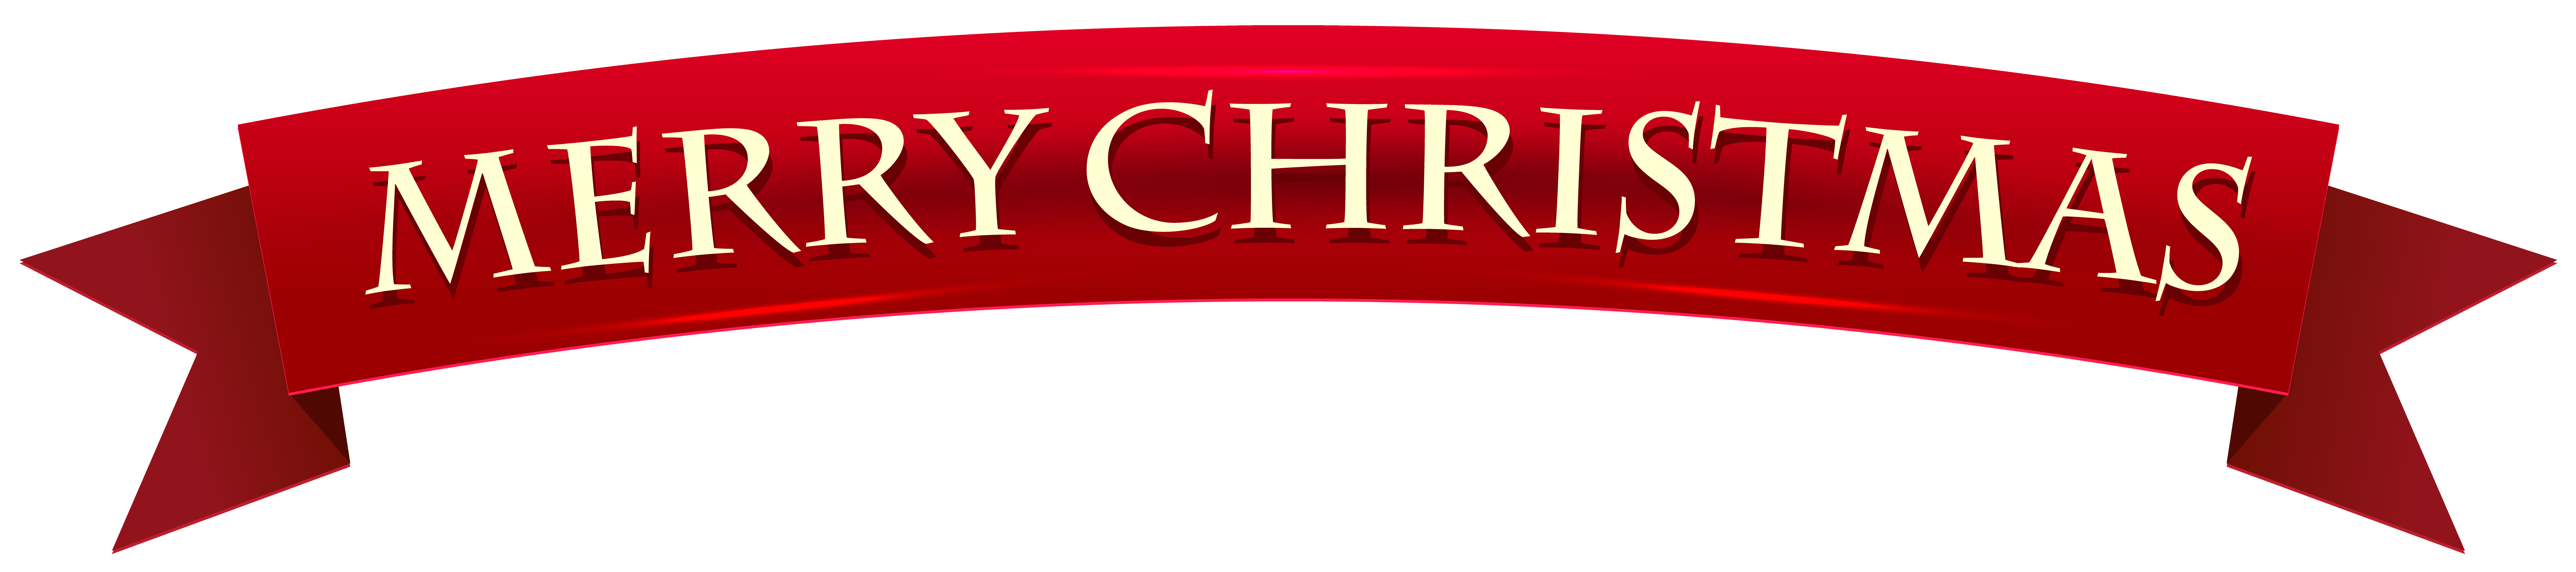 banner-merry-christmas-transparent-clip-art-image-gallery